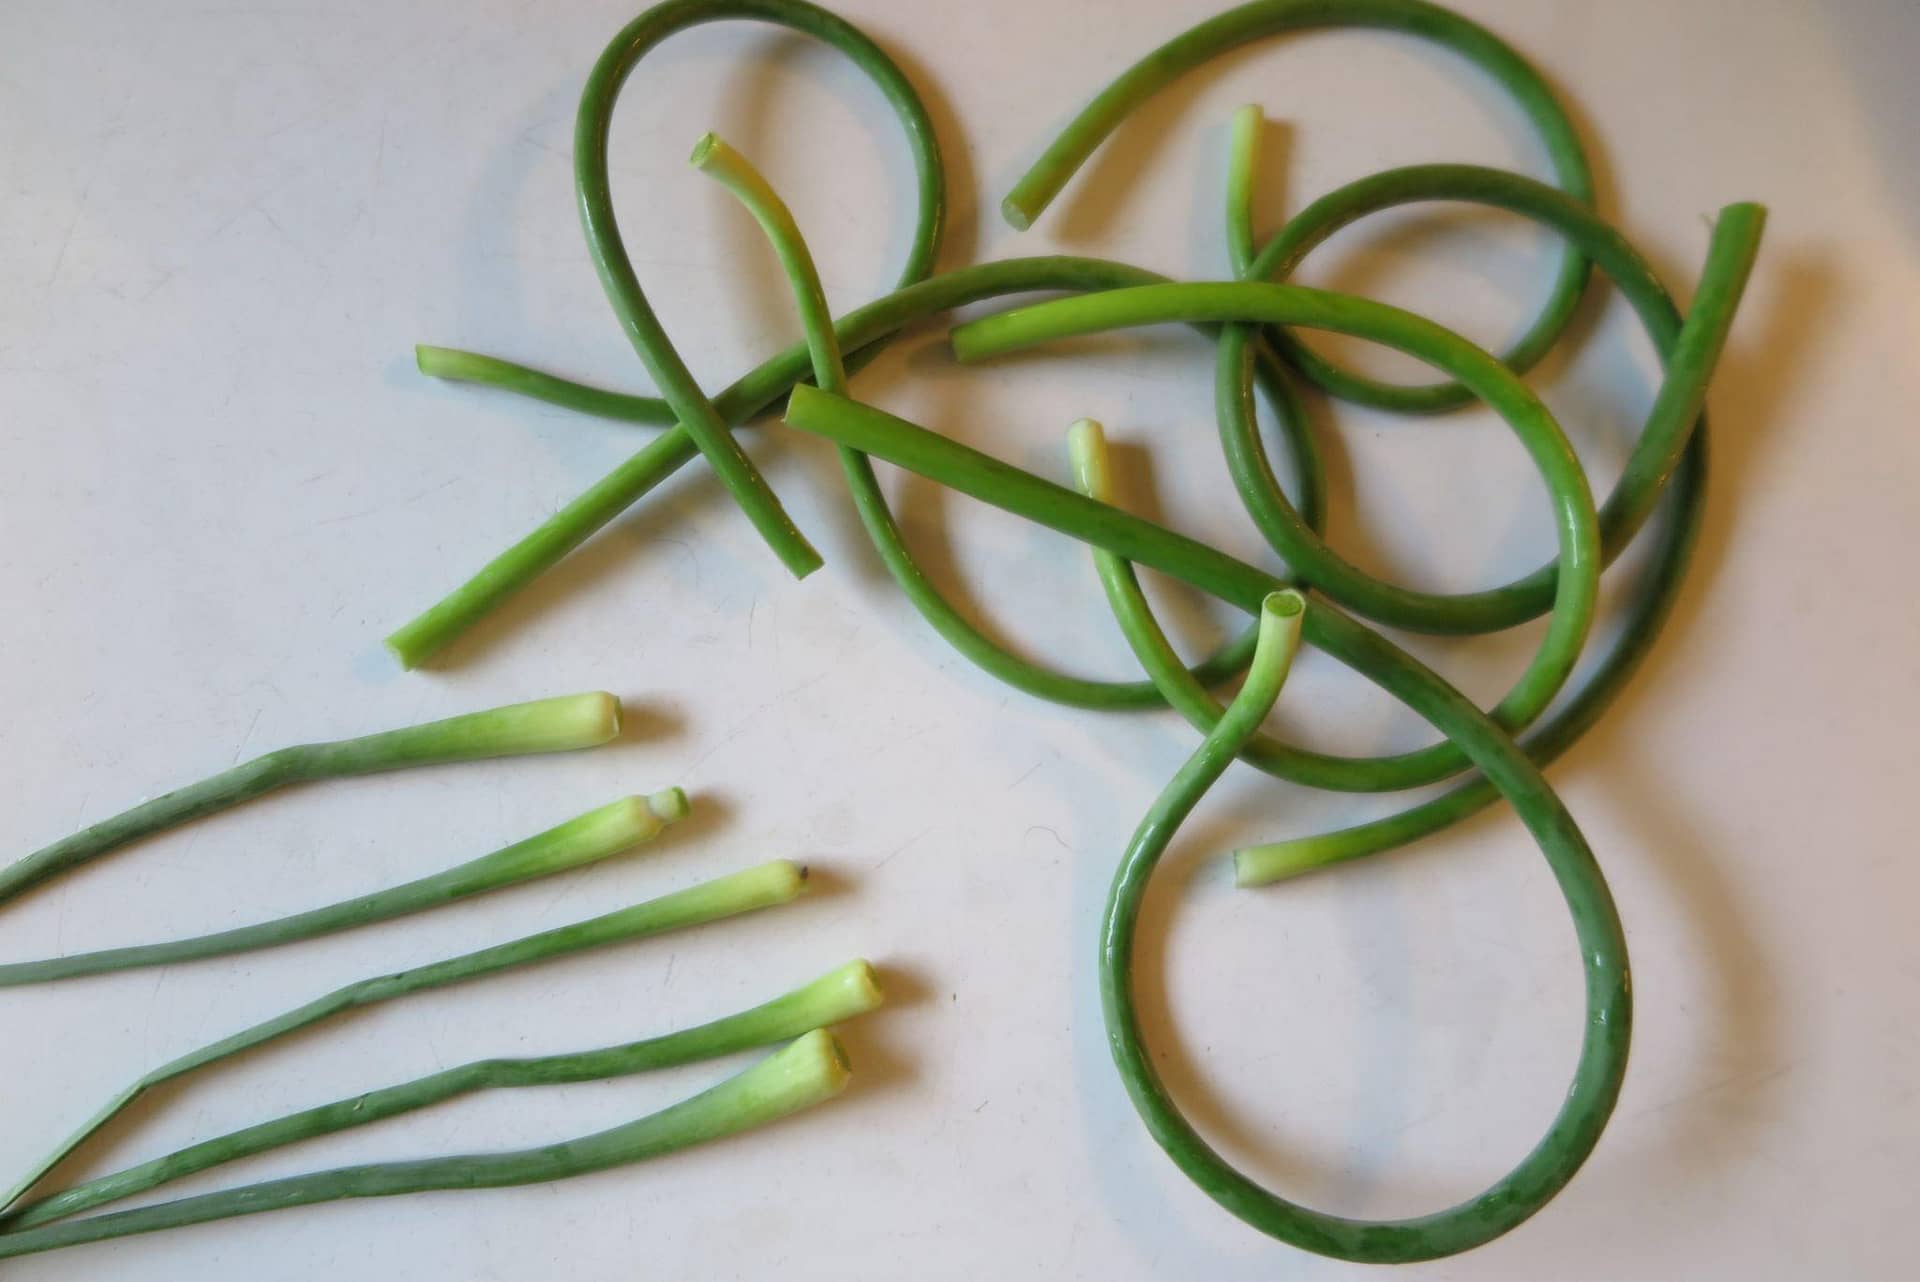 Garlic scapes with the flower removed and placed to the left of the scapes